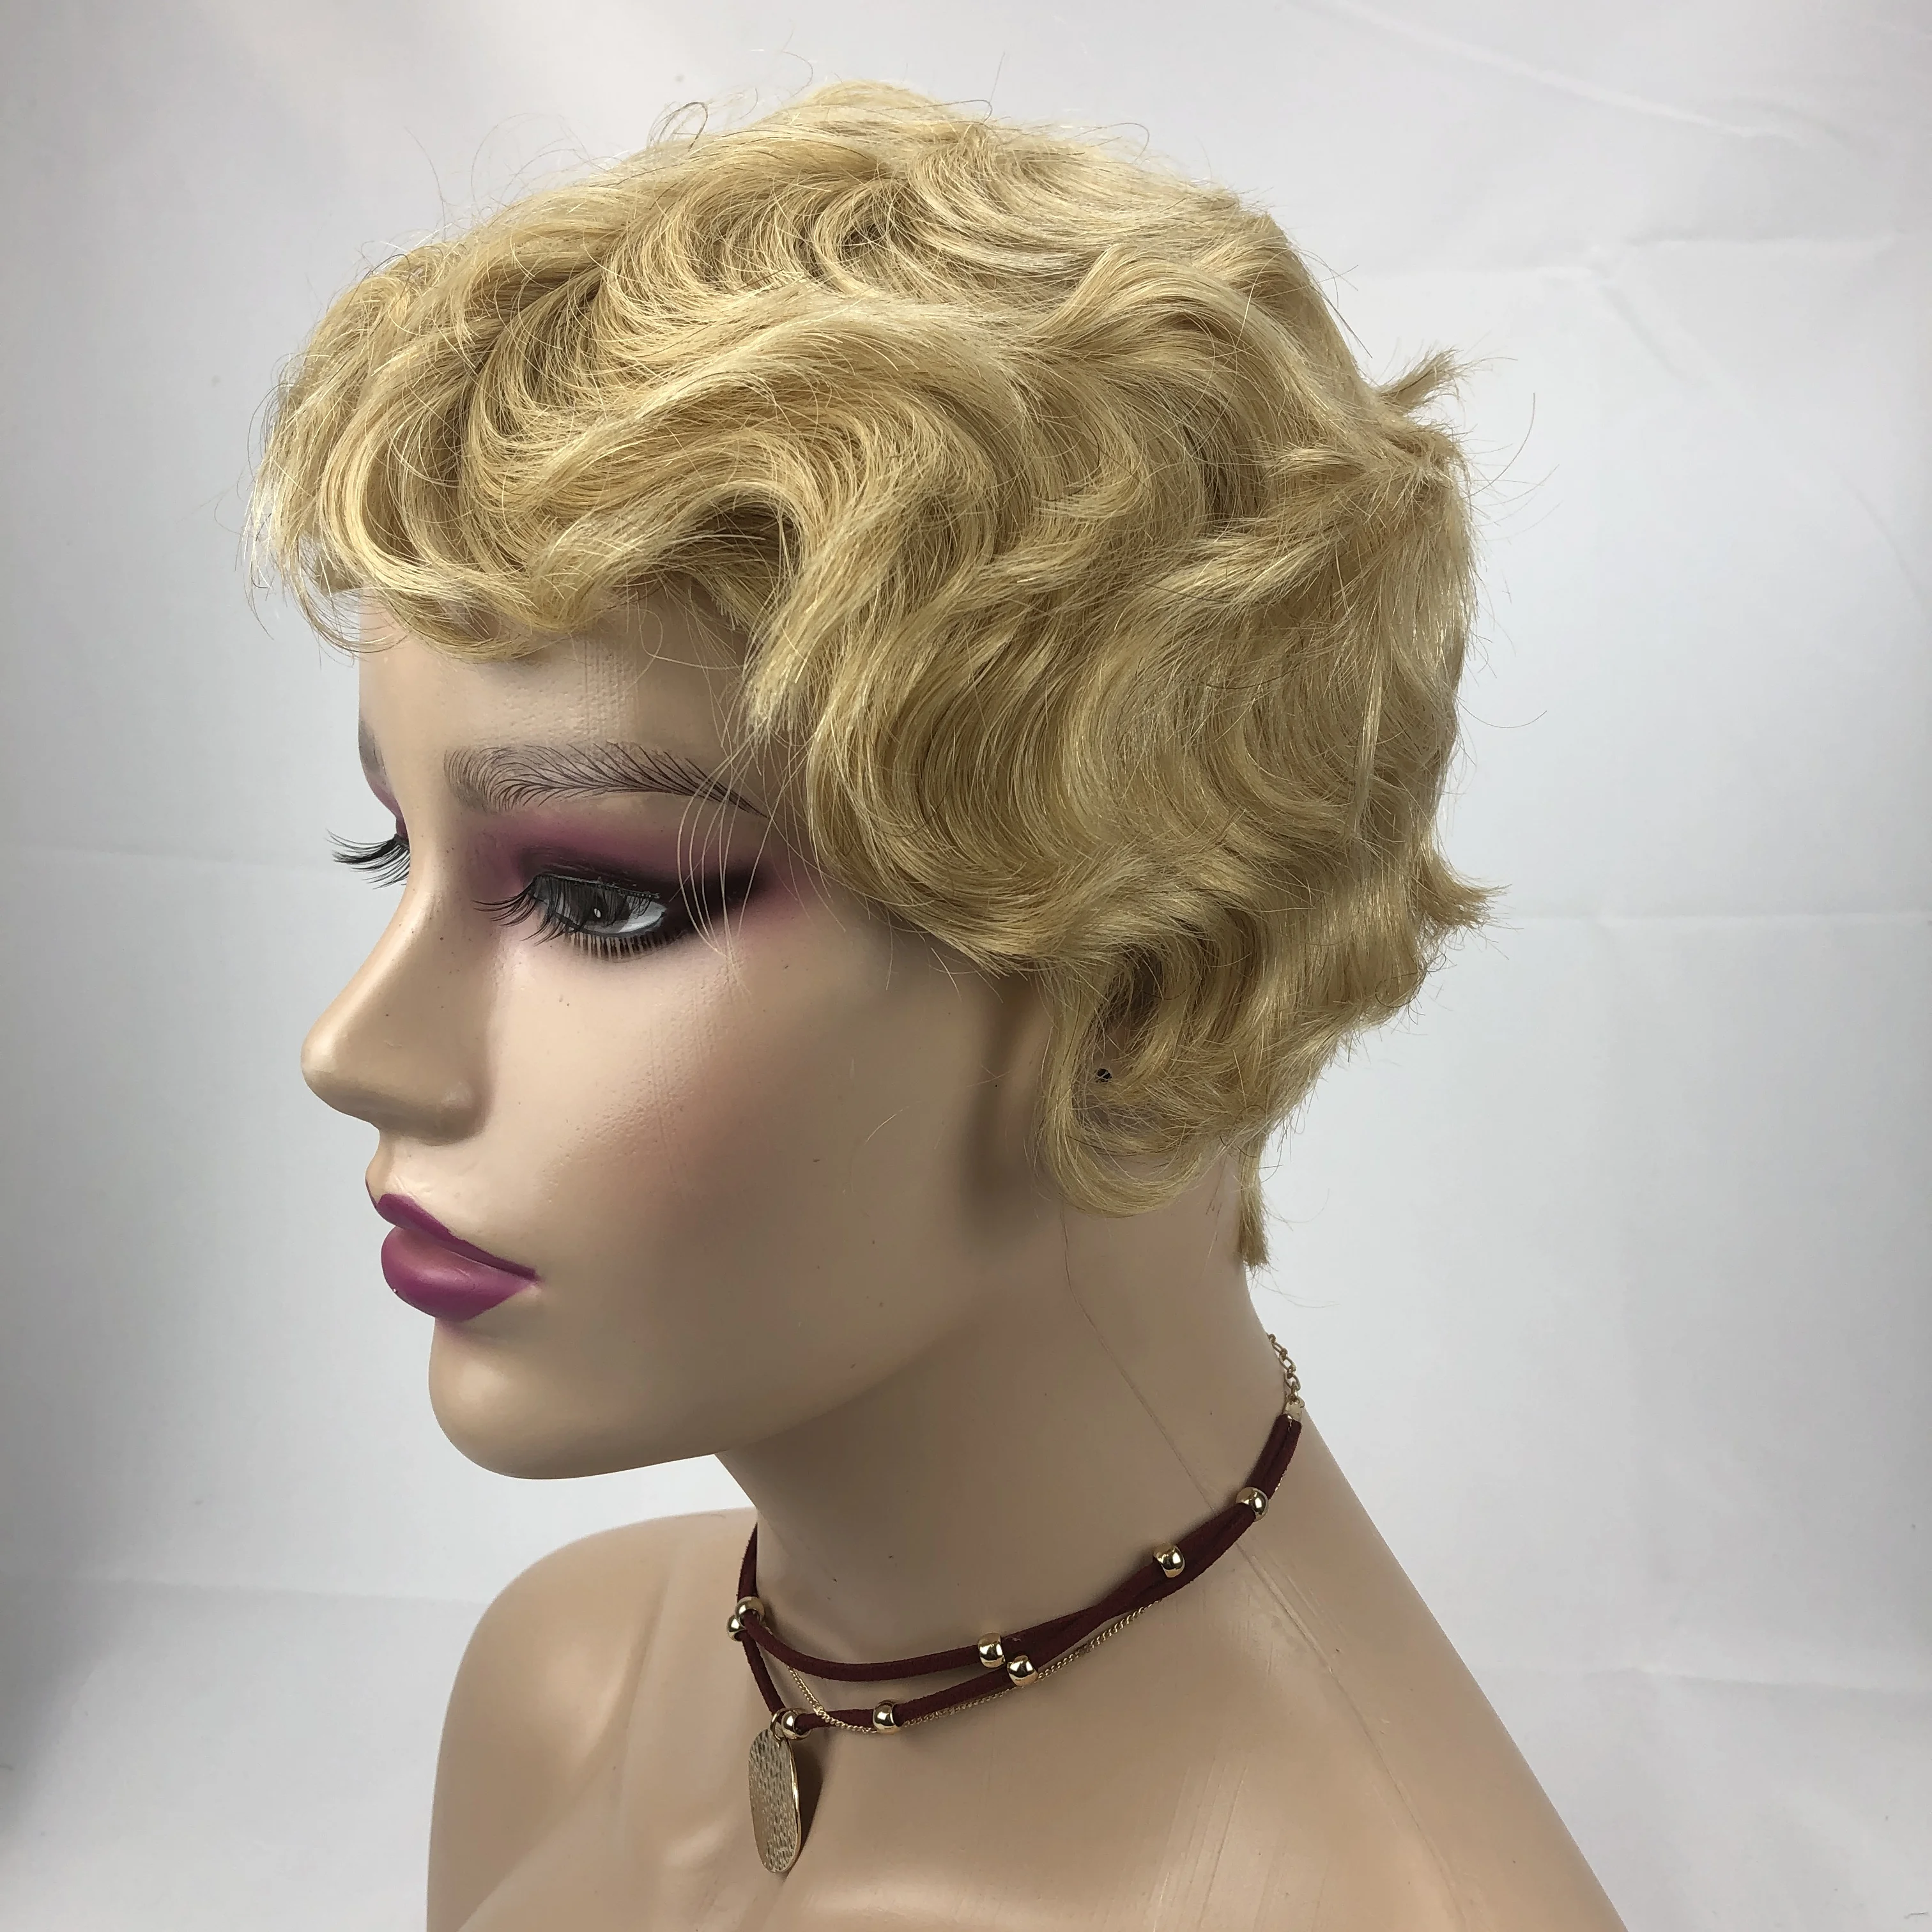 

Cheap Wholesale Virgin Remy Full Machine Made Short Perruques Cheveux Humains Pixie Cut Water Wave Wig Human Hair Wigs